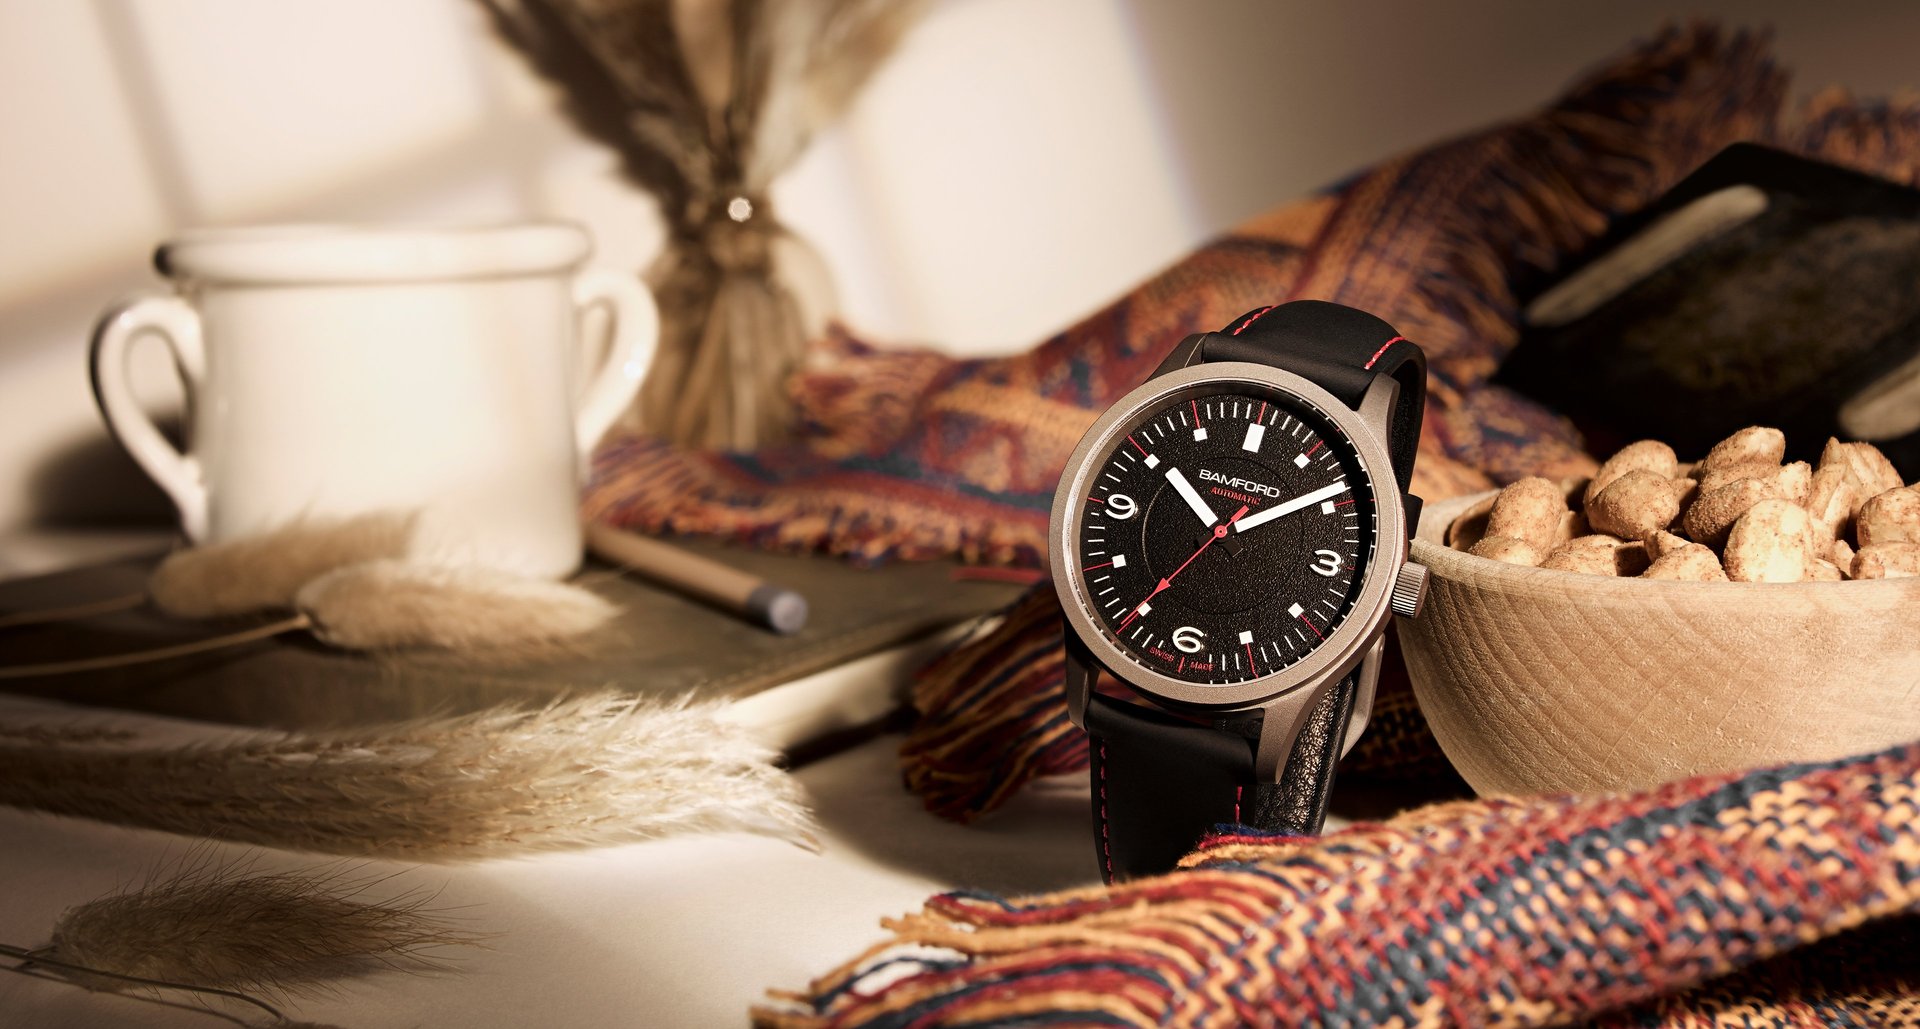 Introducing The Bamford B80 Titanium Field Watch Collection